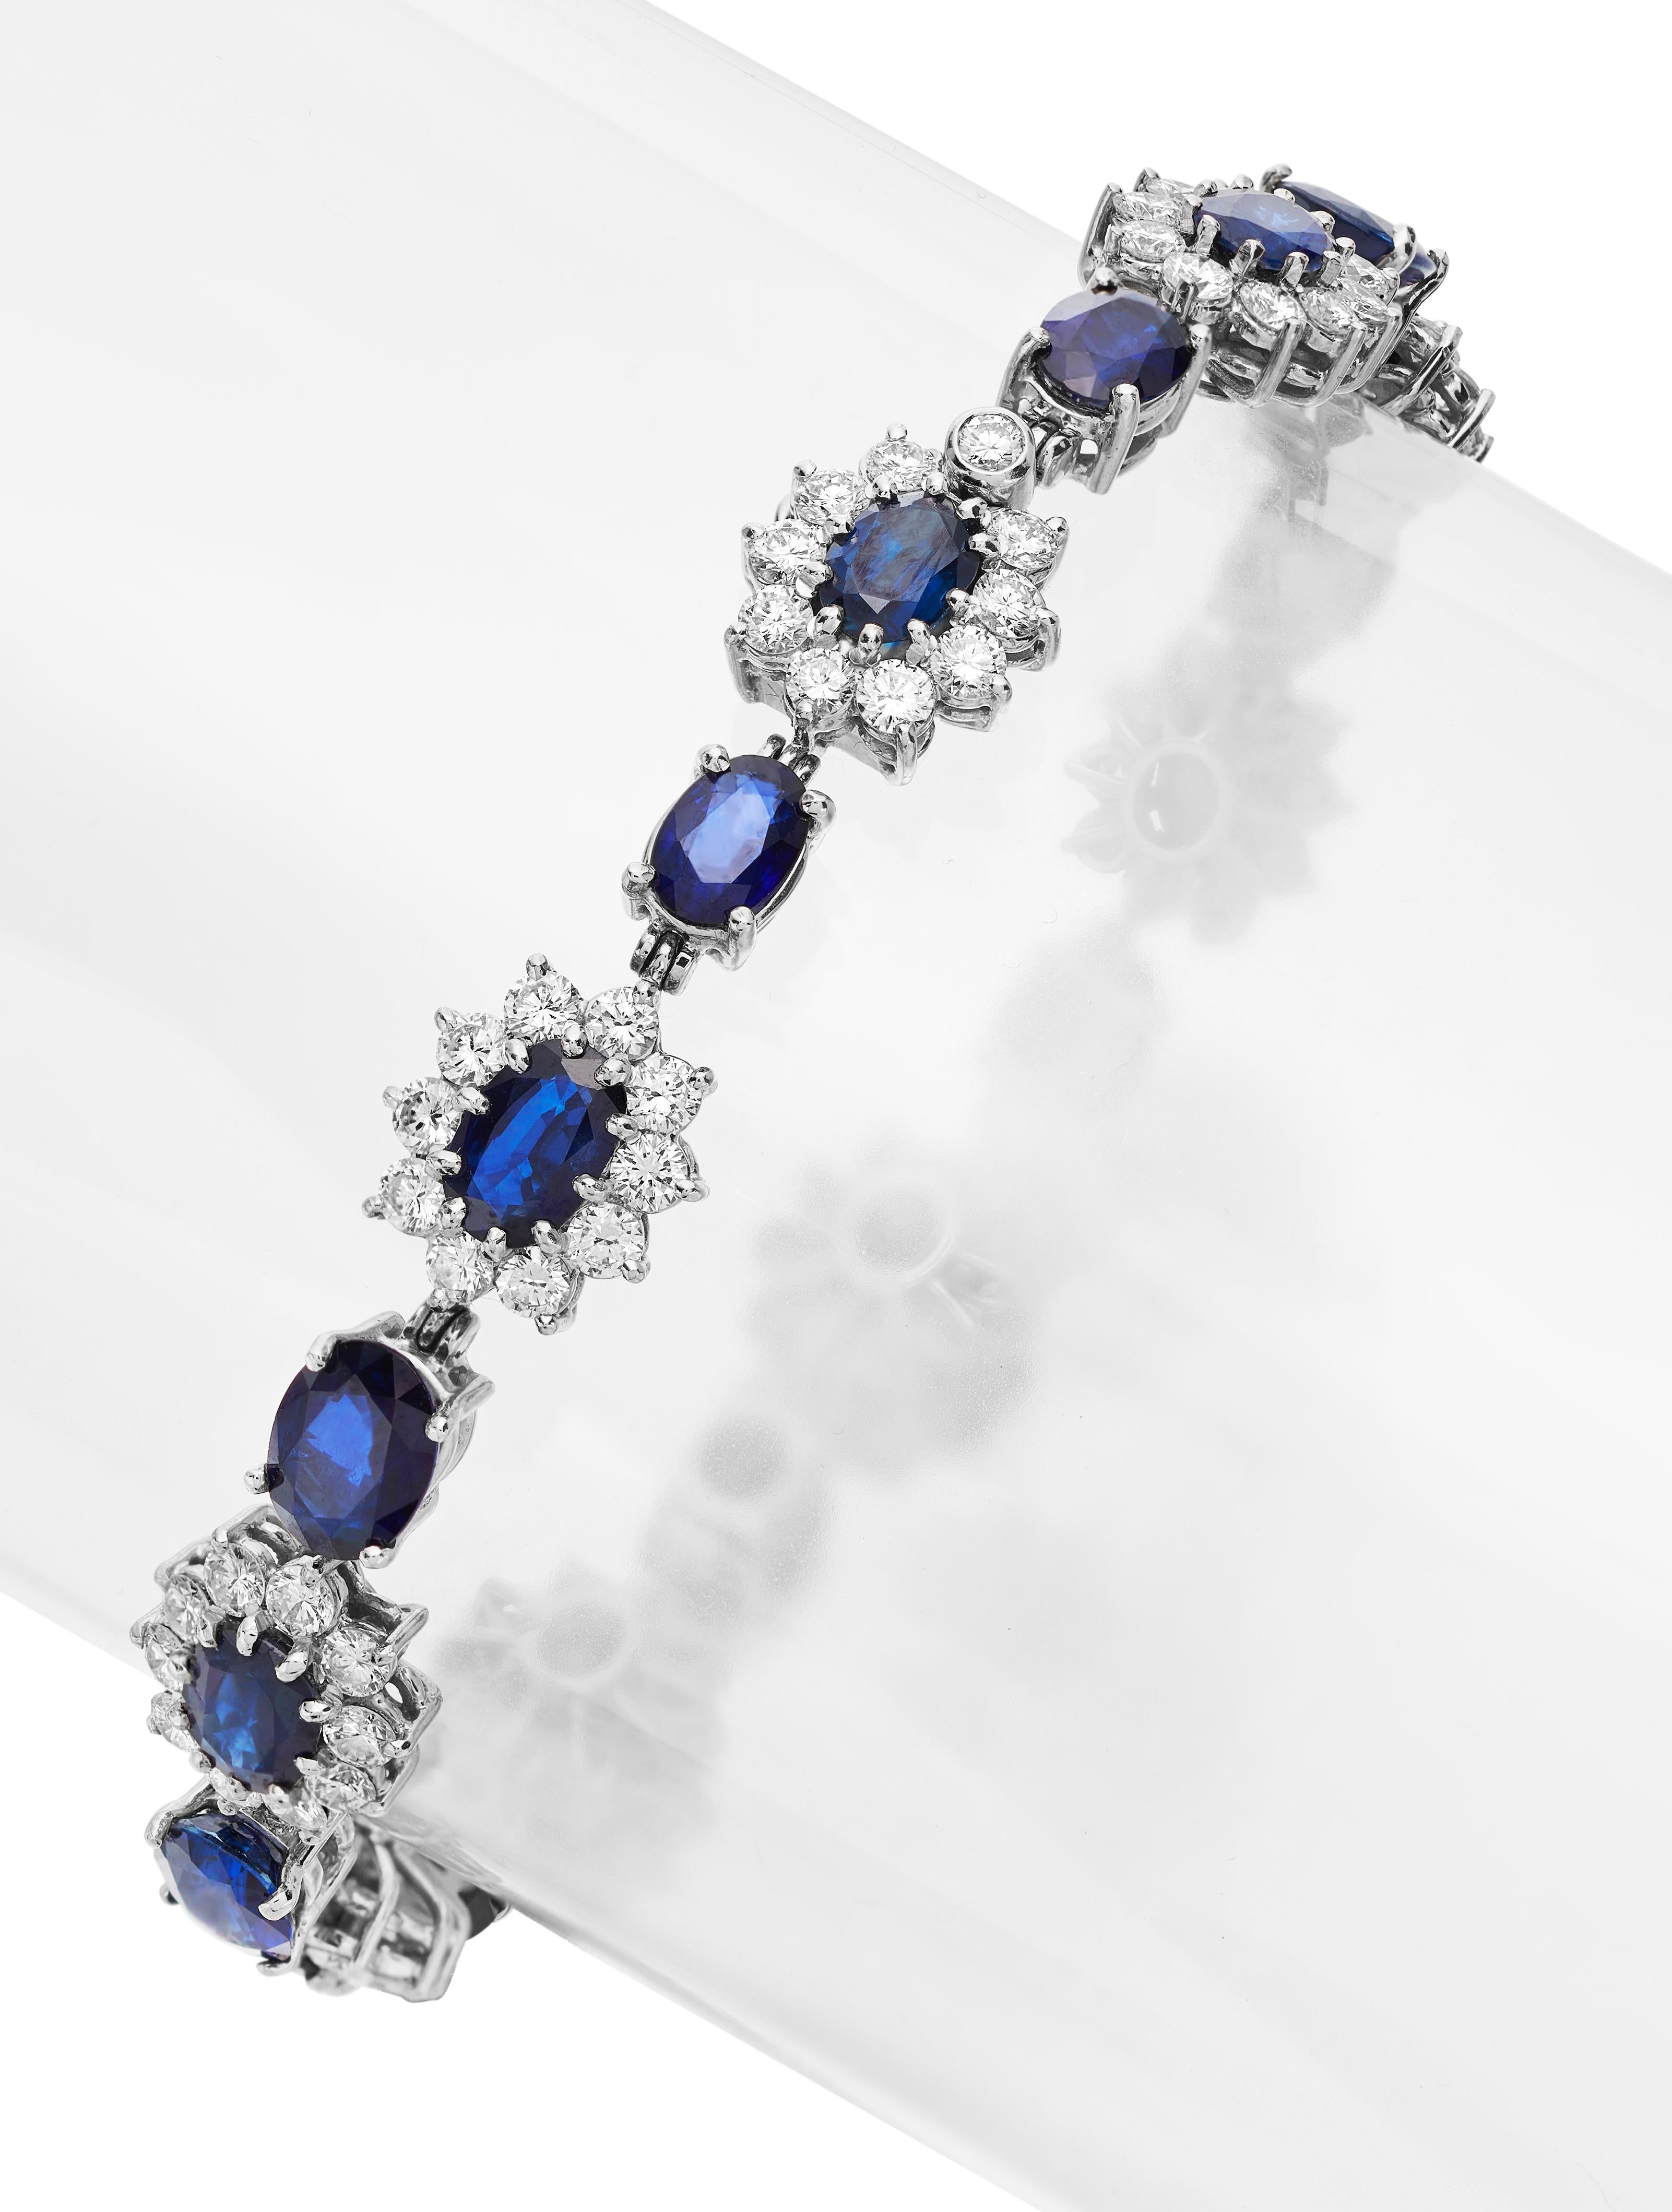 Tantalising 18 ct white gold, diamond and sapphire bracelet with an alternating pattern of oval cut deep blue sapphires with white gold border and 10 petal diamond flowers with royal blue centres separated with simple coiled links.  Set with a